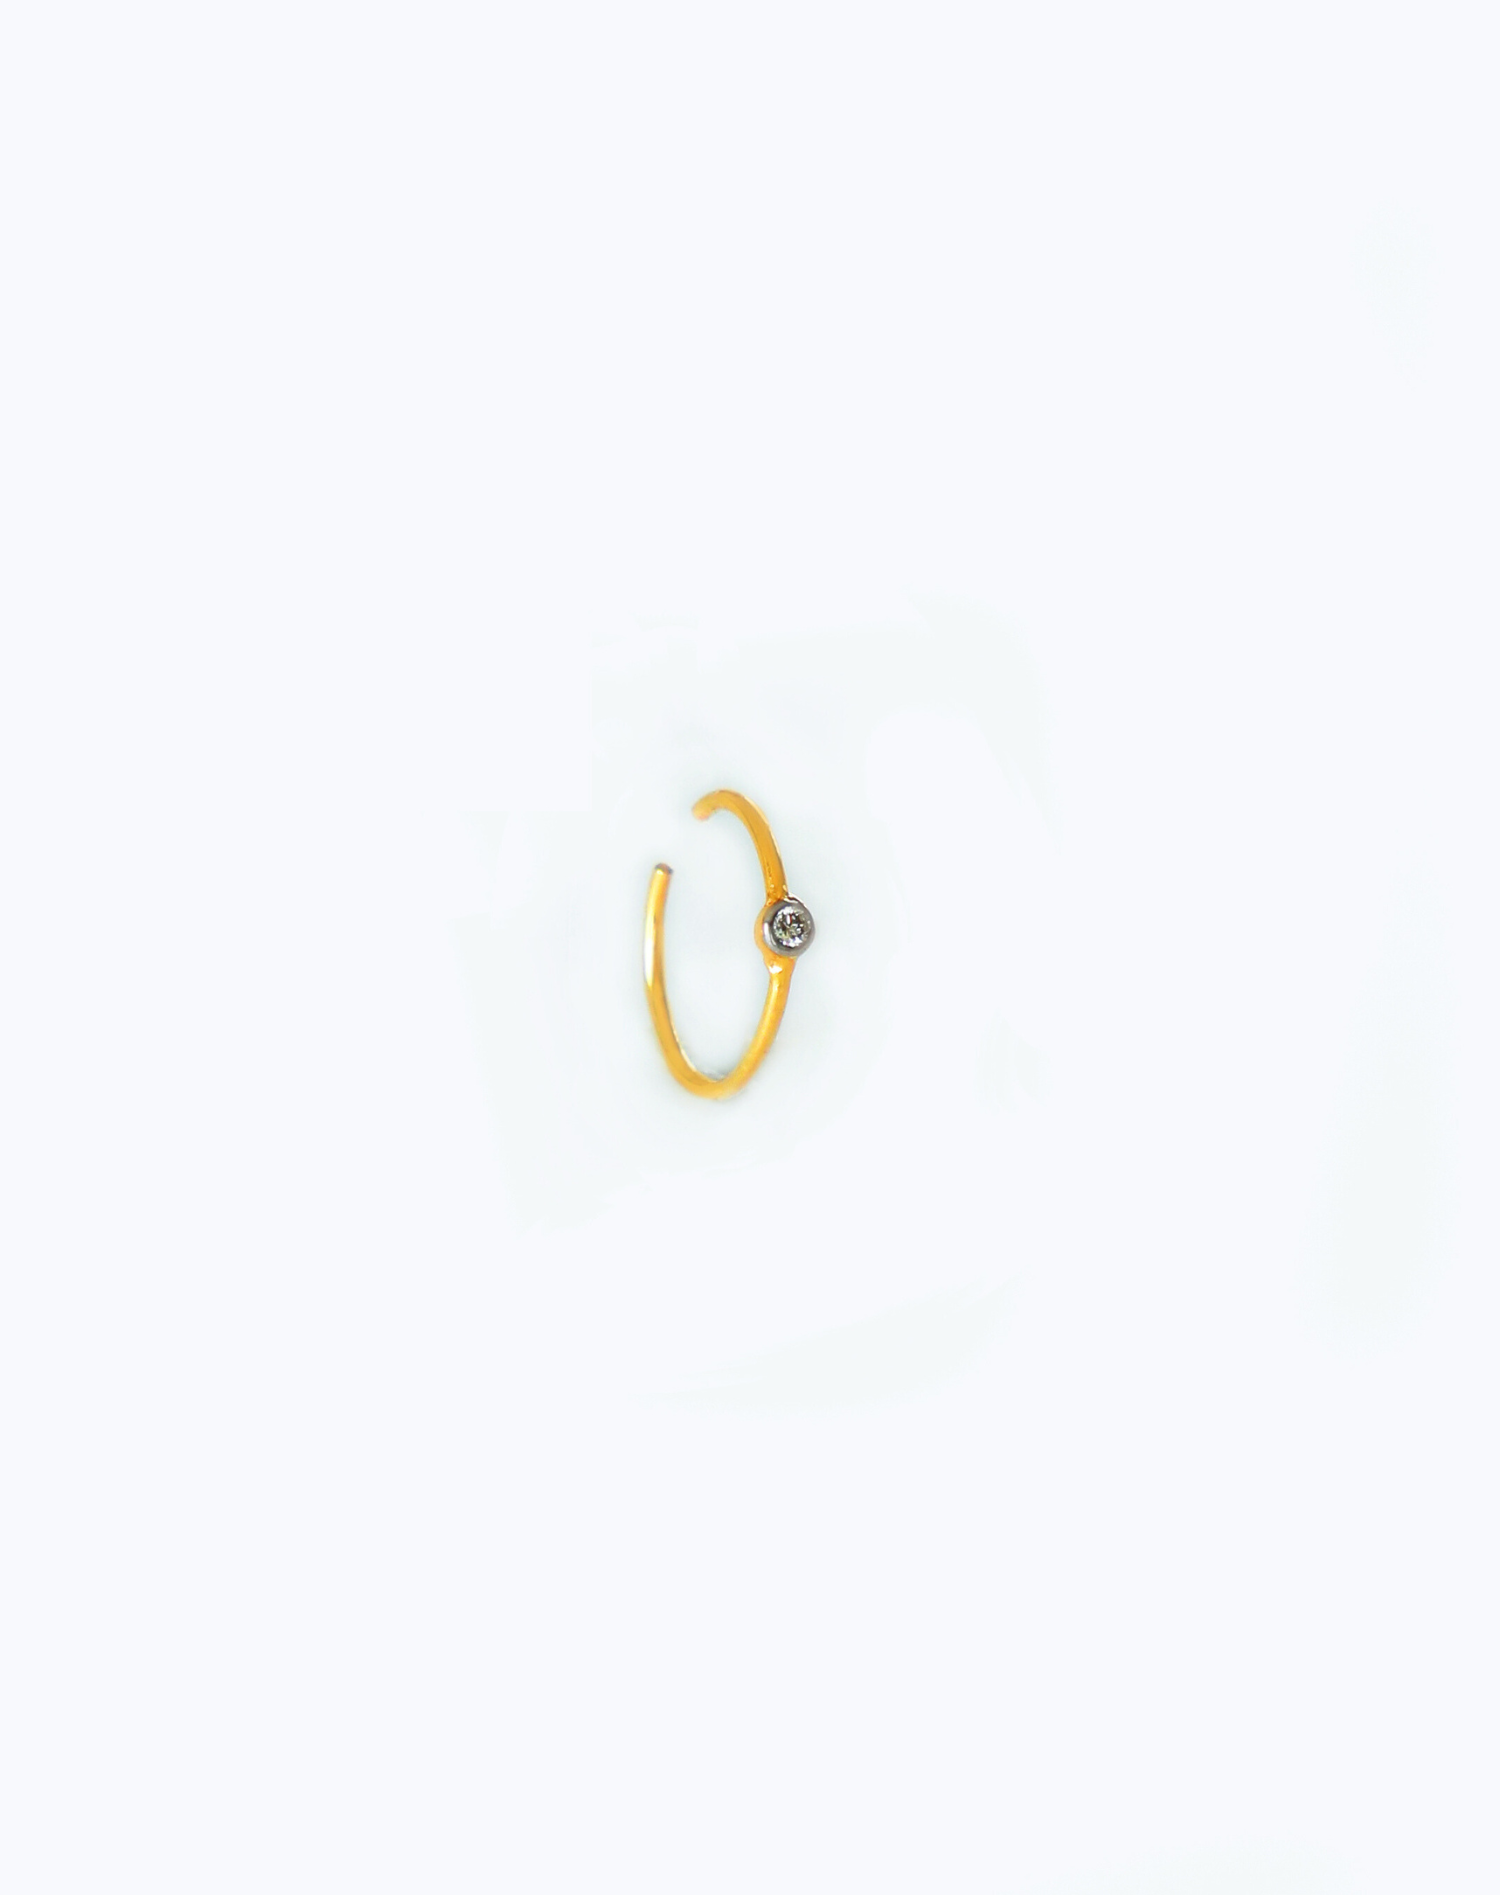 Amazon.com: JewelMore 0.01ct Diamond Nose Ring Hoop - 14K White Gold or  Yellow Gold (White) : Clothing, Shoes & Jewelry